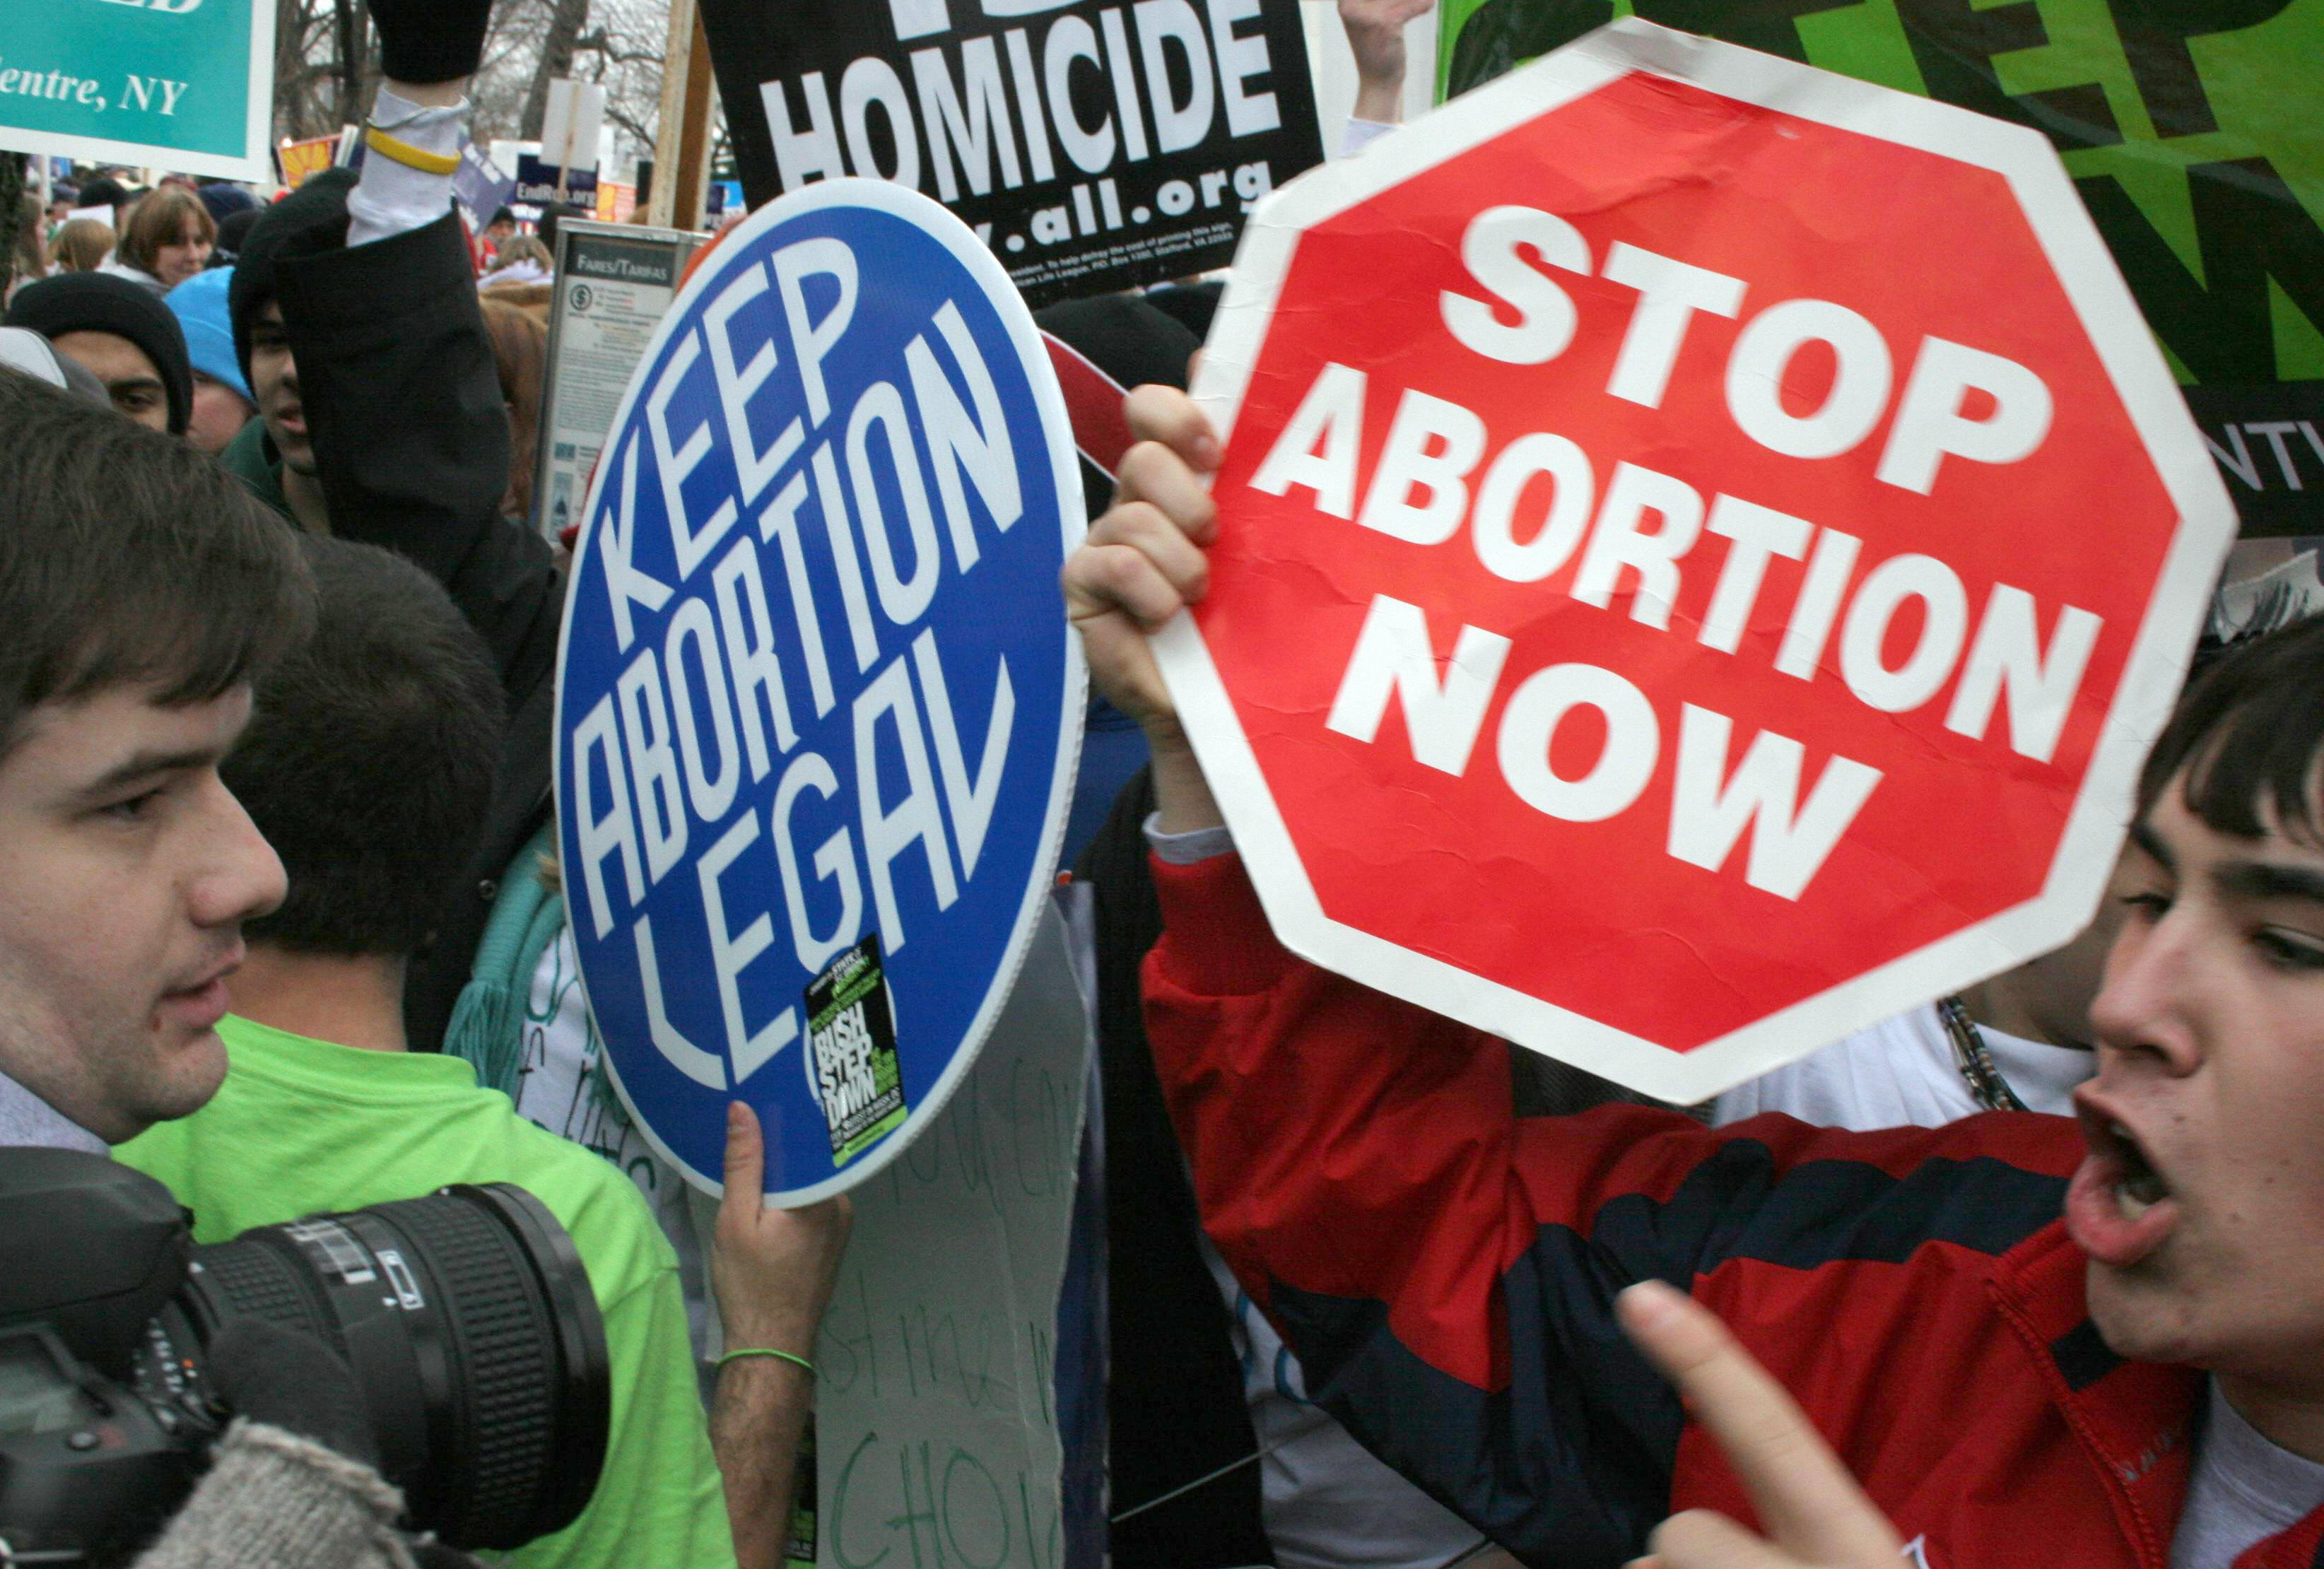 Washington, UNITED STATES: Pro-life demonstrators (R) confront pro-choice counterparts (L) 23 January 2006 in Washington, DC, as tens of thousands of pro-life and pro-choice opponents rally marking the 33rd anniversary of the Supreme Court ruling on abortion. Abortion has been legal in the United States since the Supreme Court's decision in Roe v. Wade on 22 January 1973. AFP PHOTO/Karen BLEIER (Photo credit should read KAREN BLEIER/AFP/Getty Images)